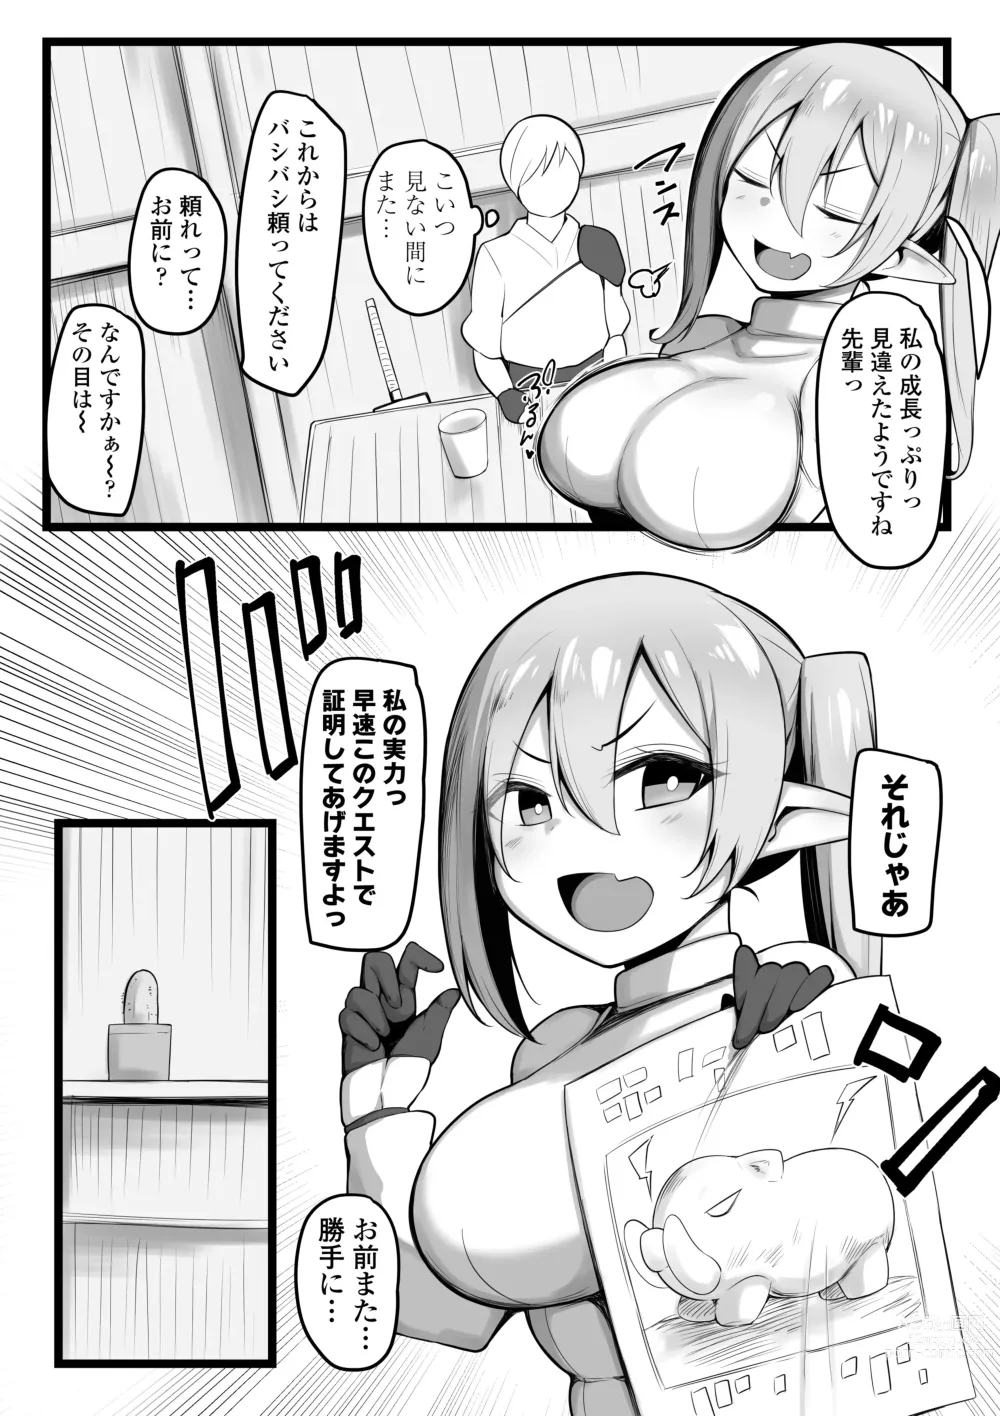 Page 4 of doujinshi NTR Guild